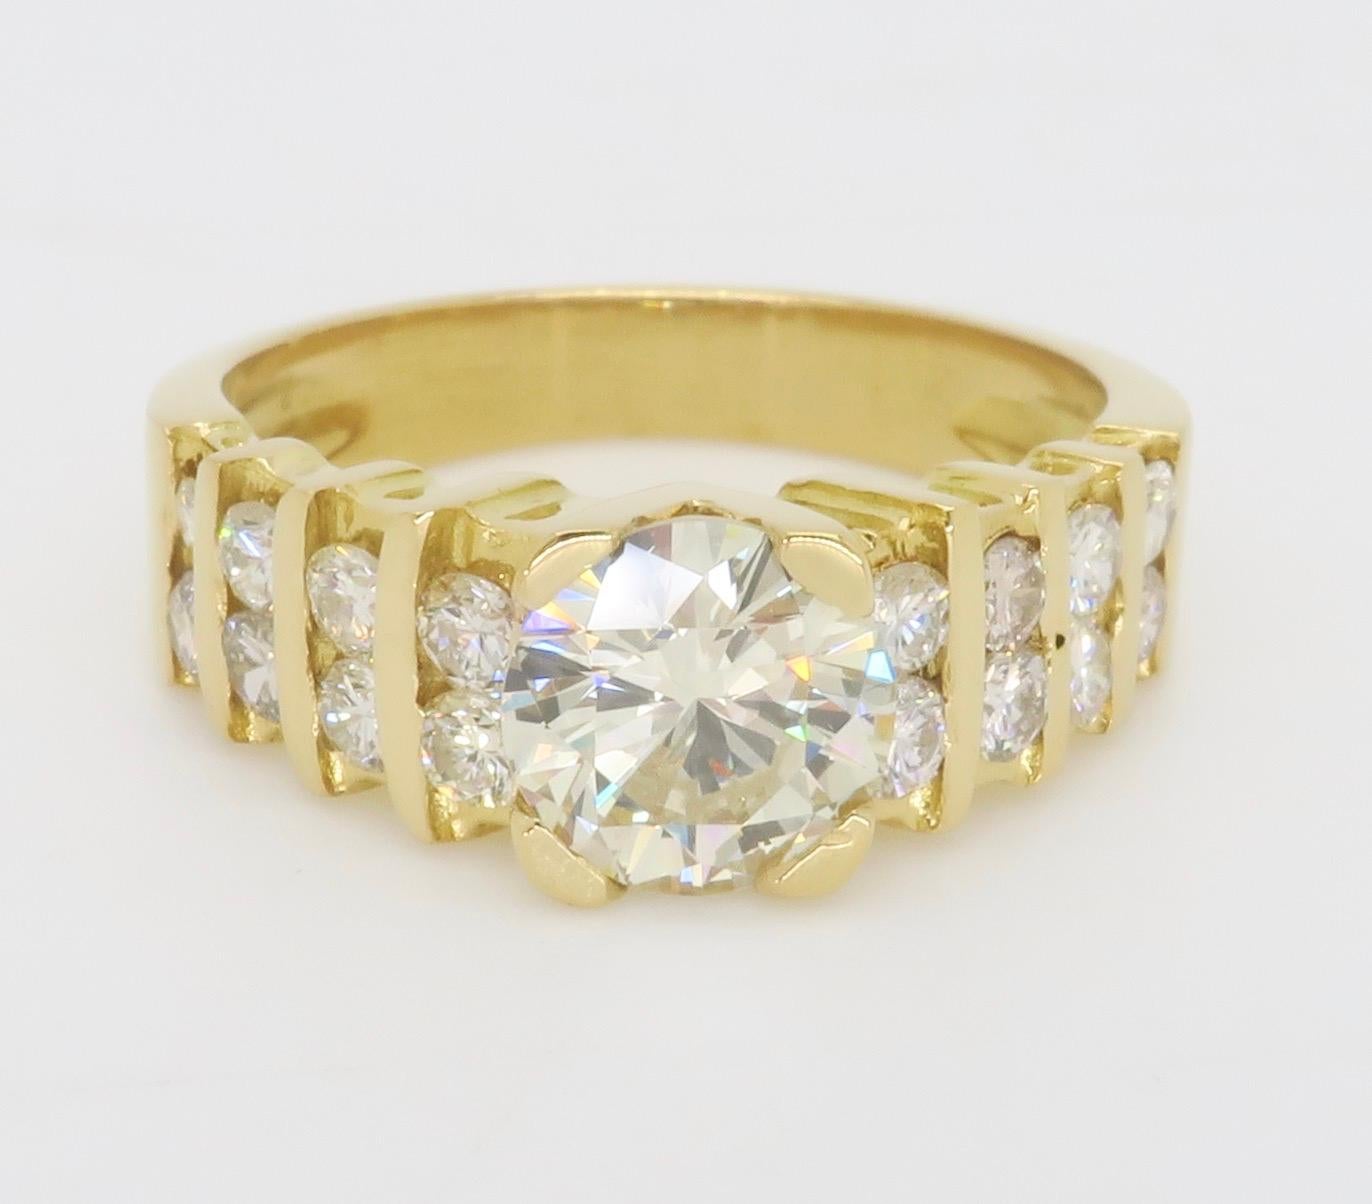 1.54ctw Diamond Encrusted Ring in 14k Yellow Gold For Sale 5